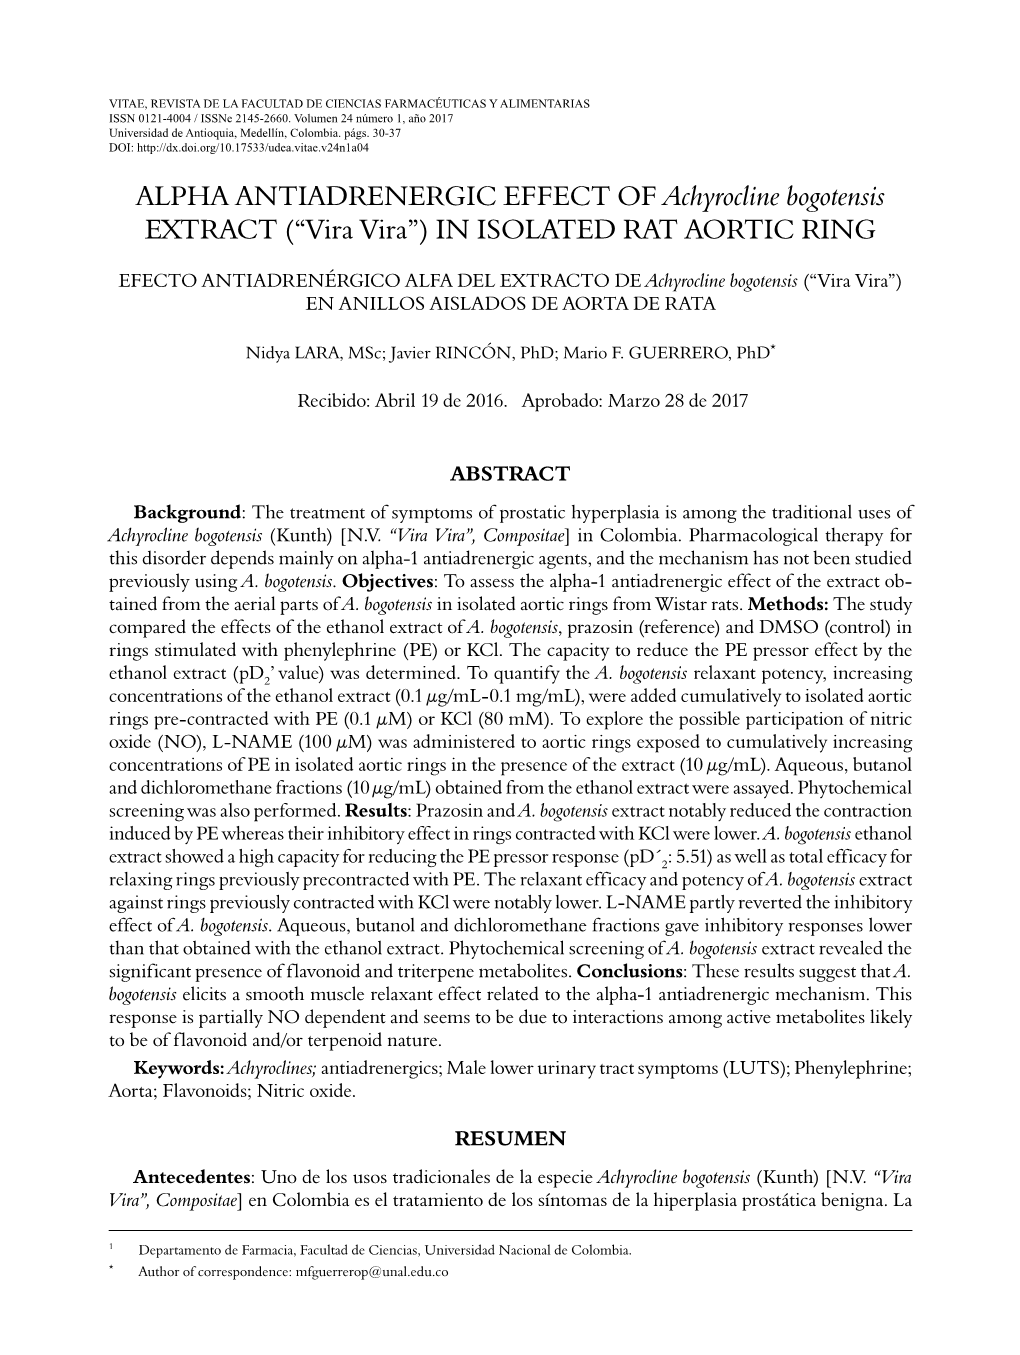 ALPHA ANTIADRENERGIC EFFECT of Achyrocline Bogotensis EXTRACT (“Vira Vira”) in ISOLATED RAT AORTIC RING